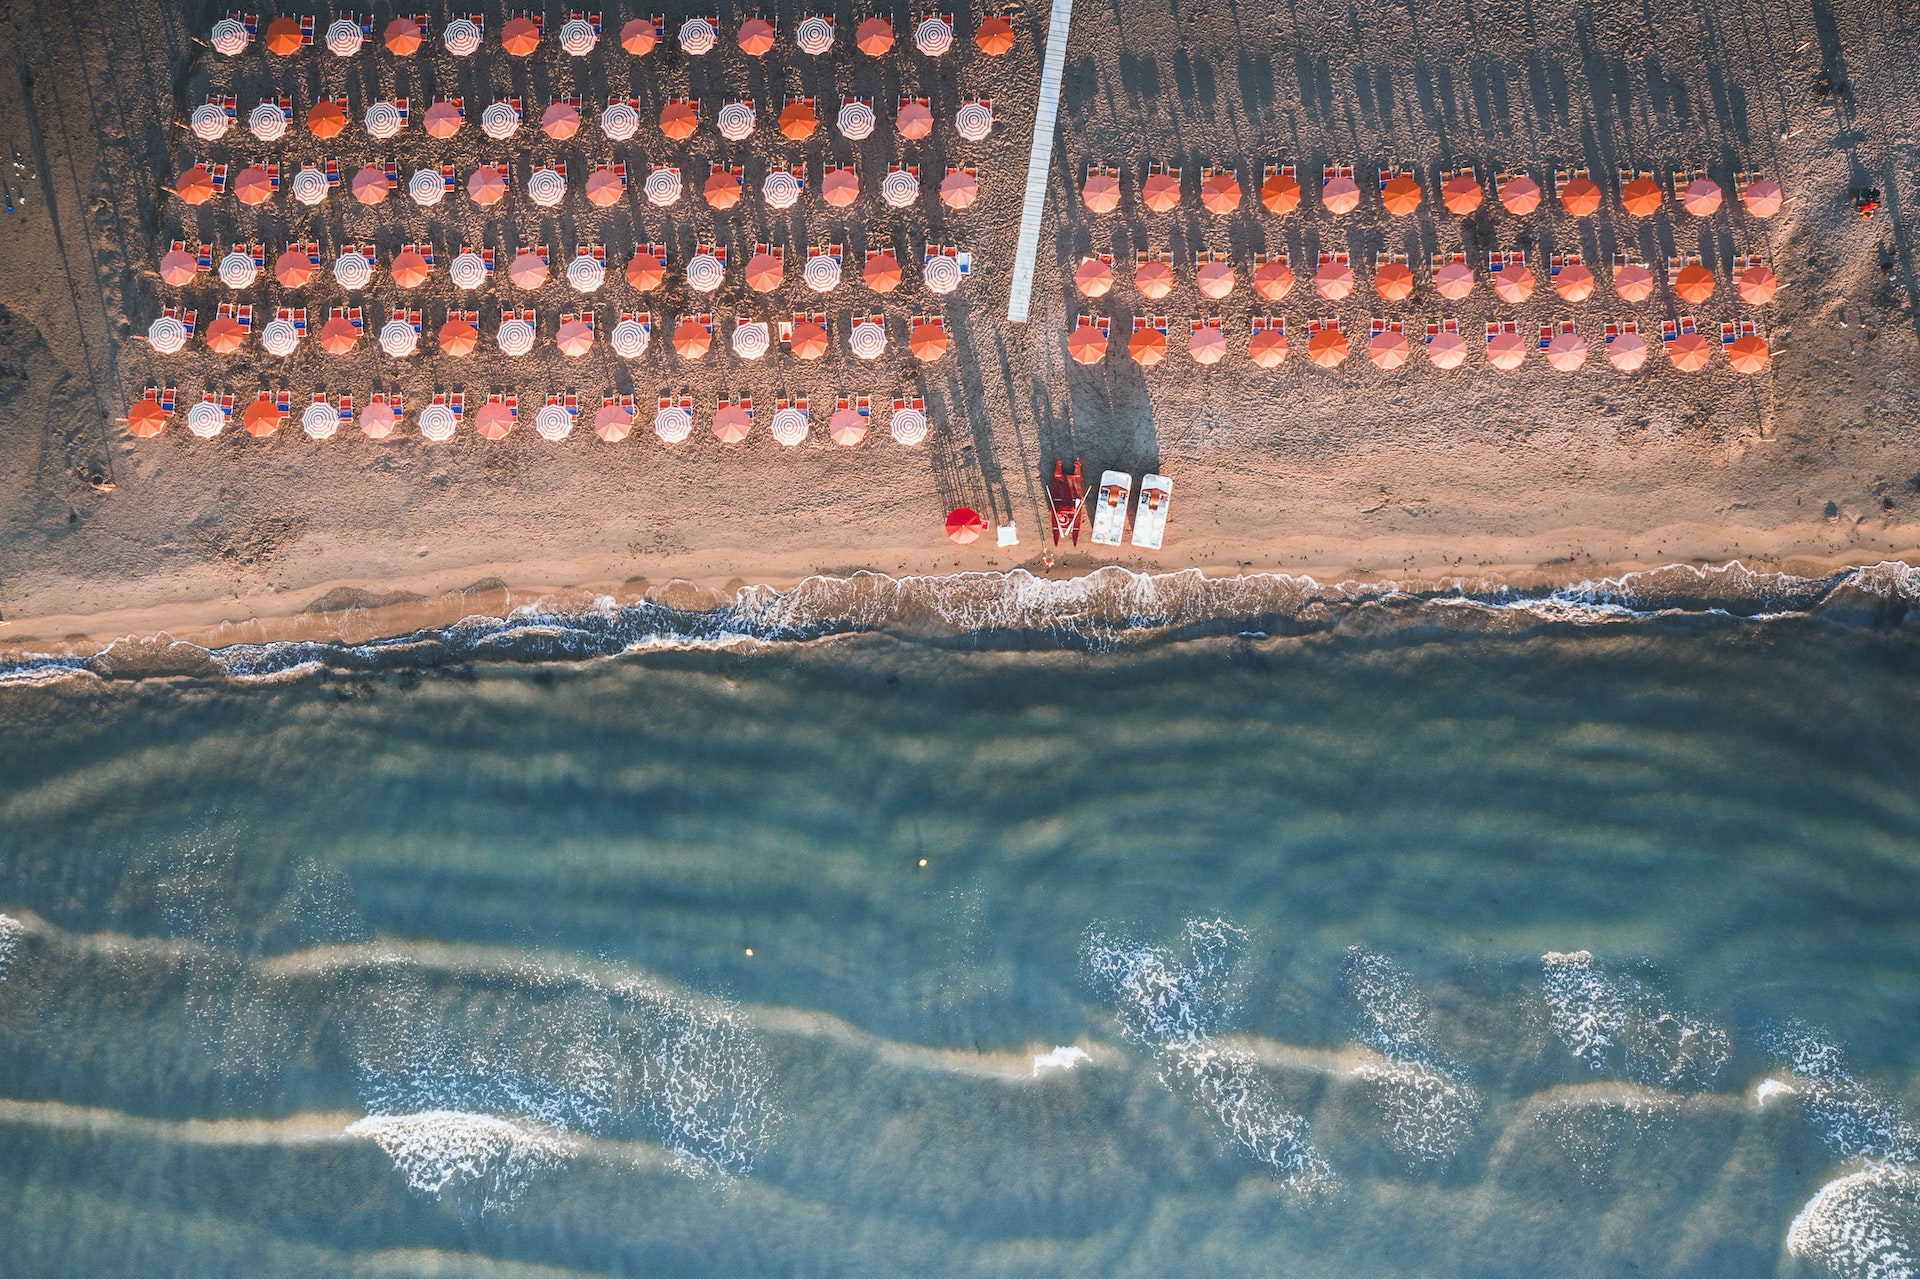 Aerial view of sunshades on sand beach washed by waves